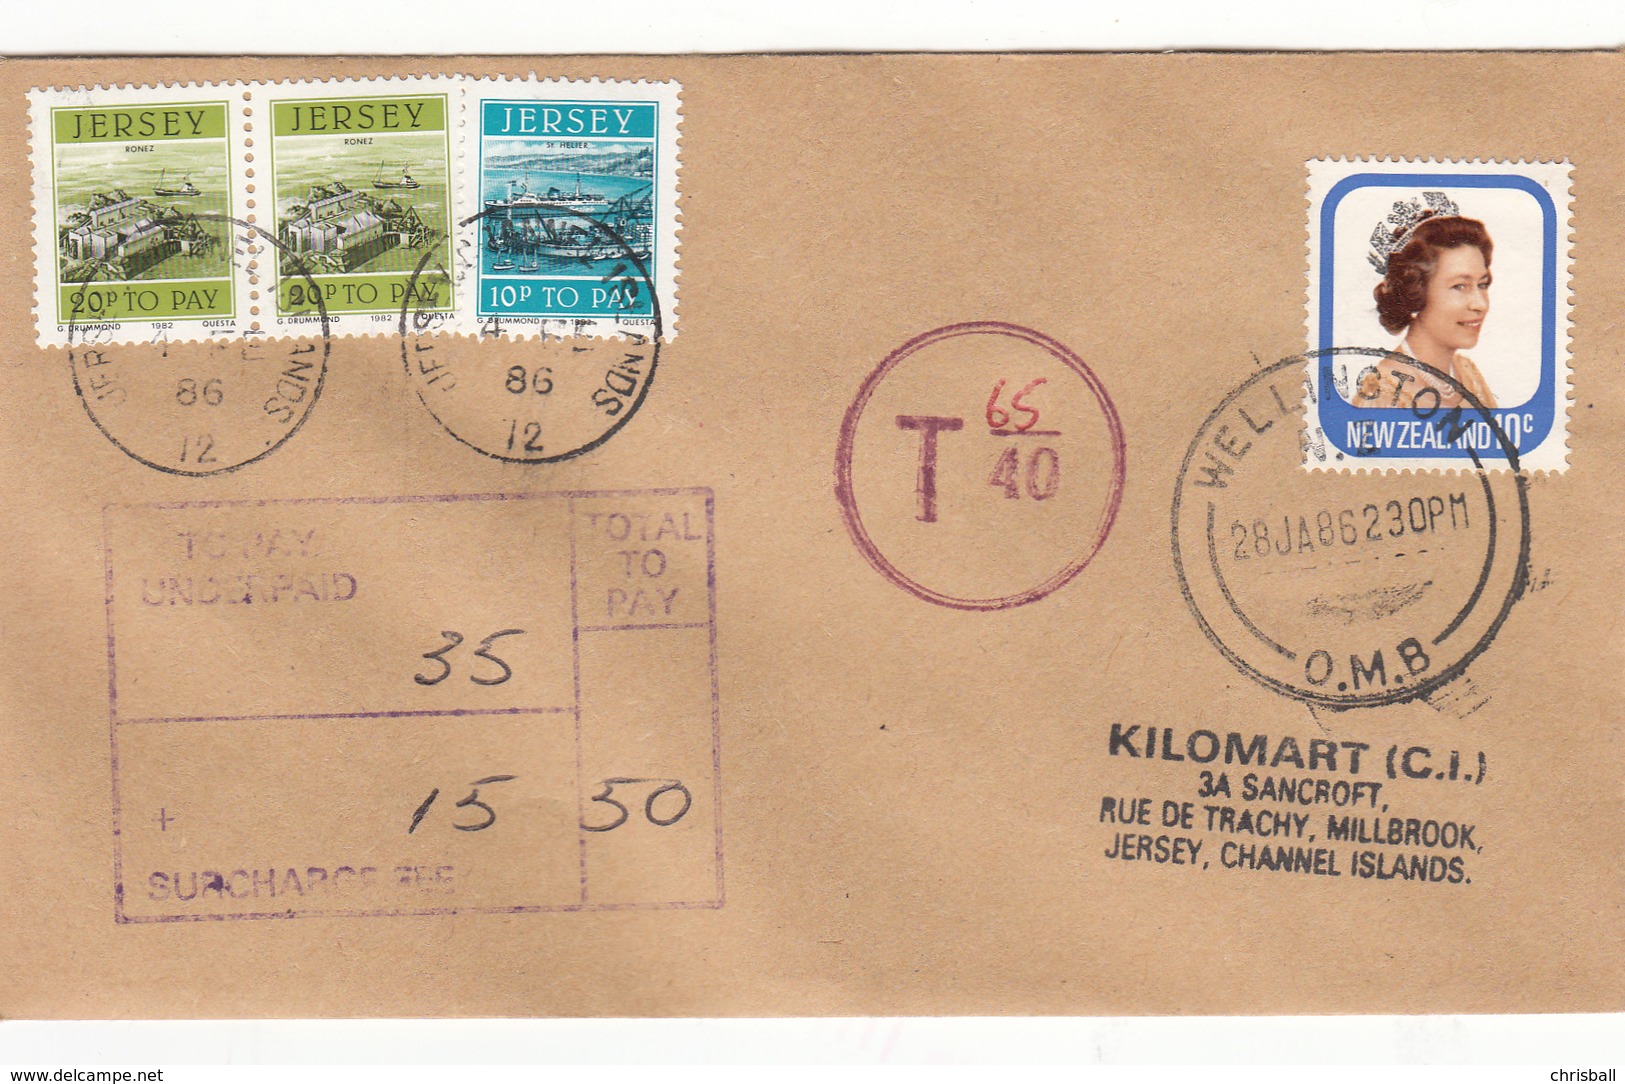 New Zealand Pictorial Used On Underpaid Cover To Jersey With Postage Due 2 X 20p + 10p - Postage Due